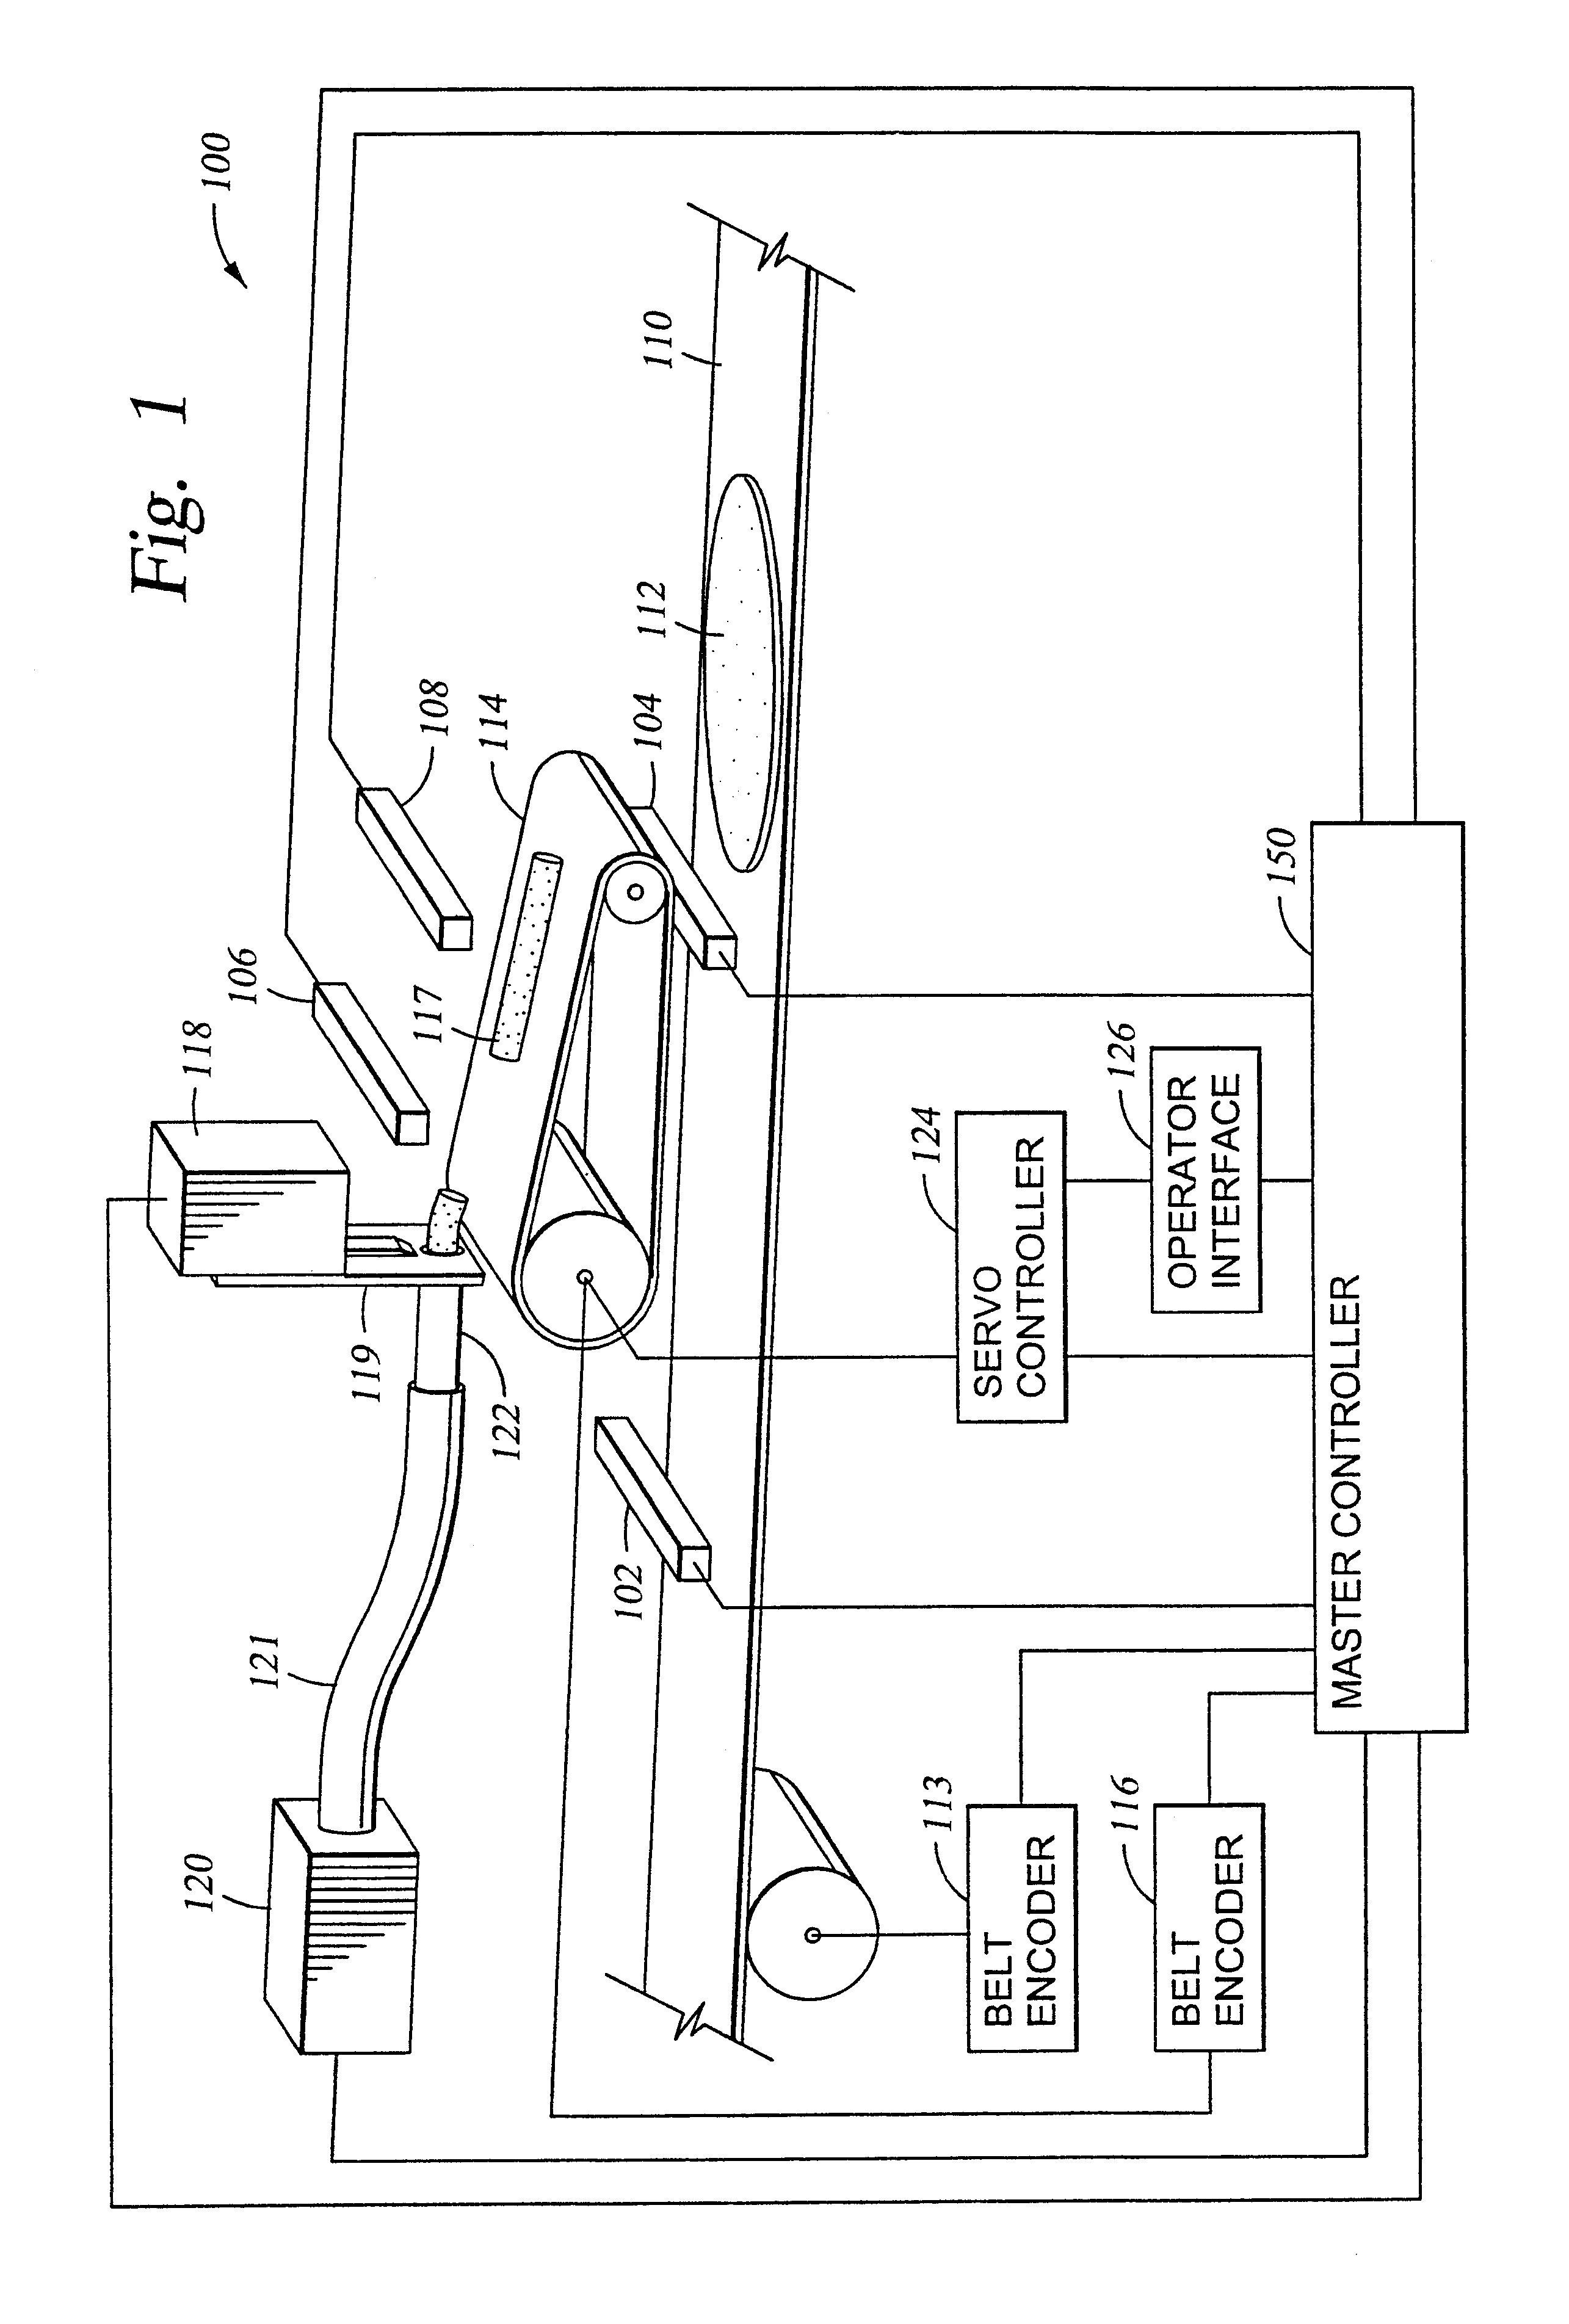 Method for automatically sizing and positioning filling material upon randomly spaced tortillas advancing upon conveyor